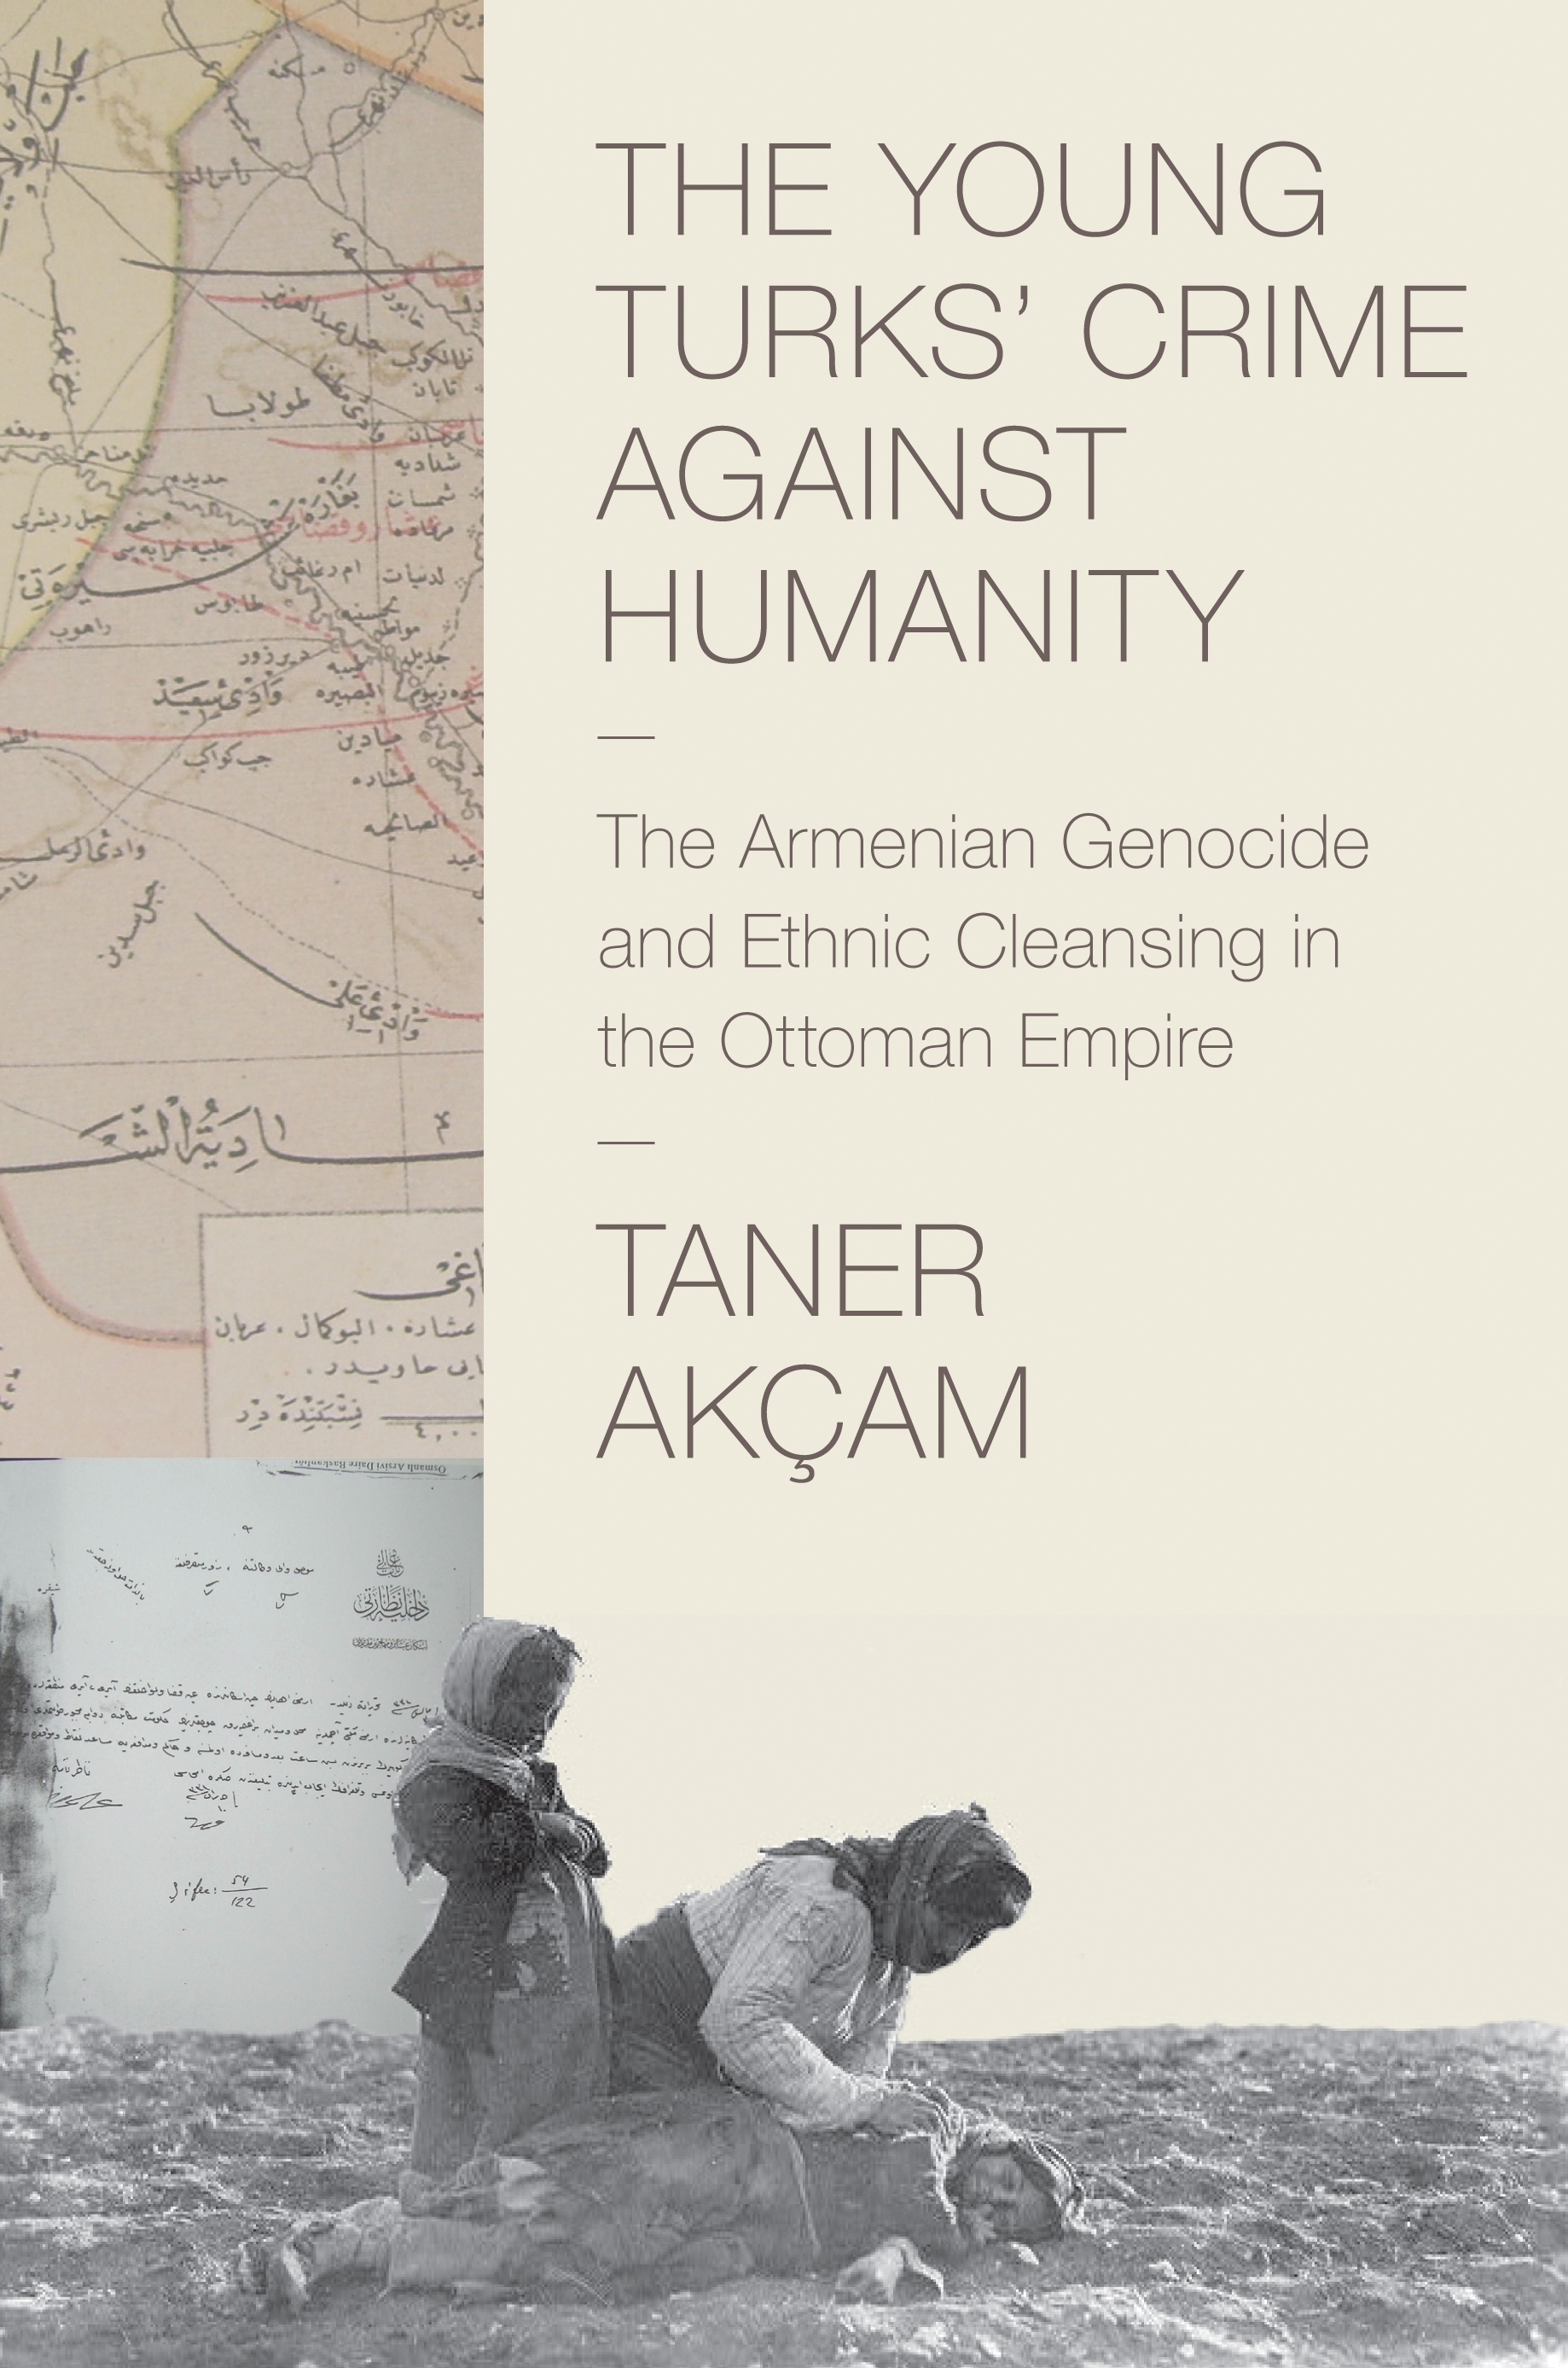 Cover of The Young Turks' Crime against Humanity: The Armenian Genocide and Ethnic Cleansing in the Ottoman Empire by Taner Akçam